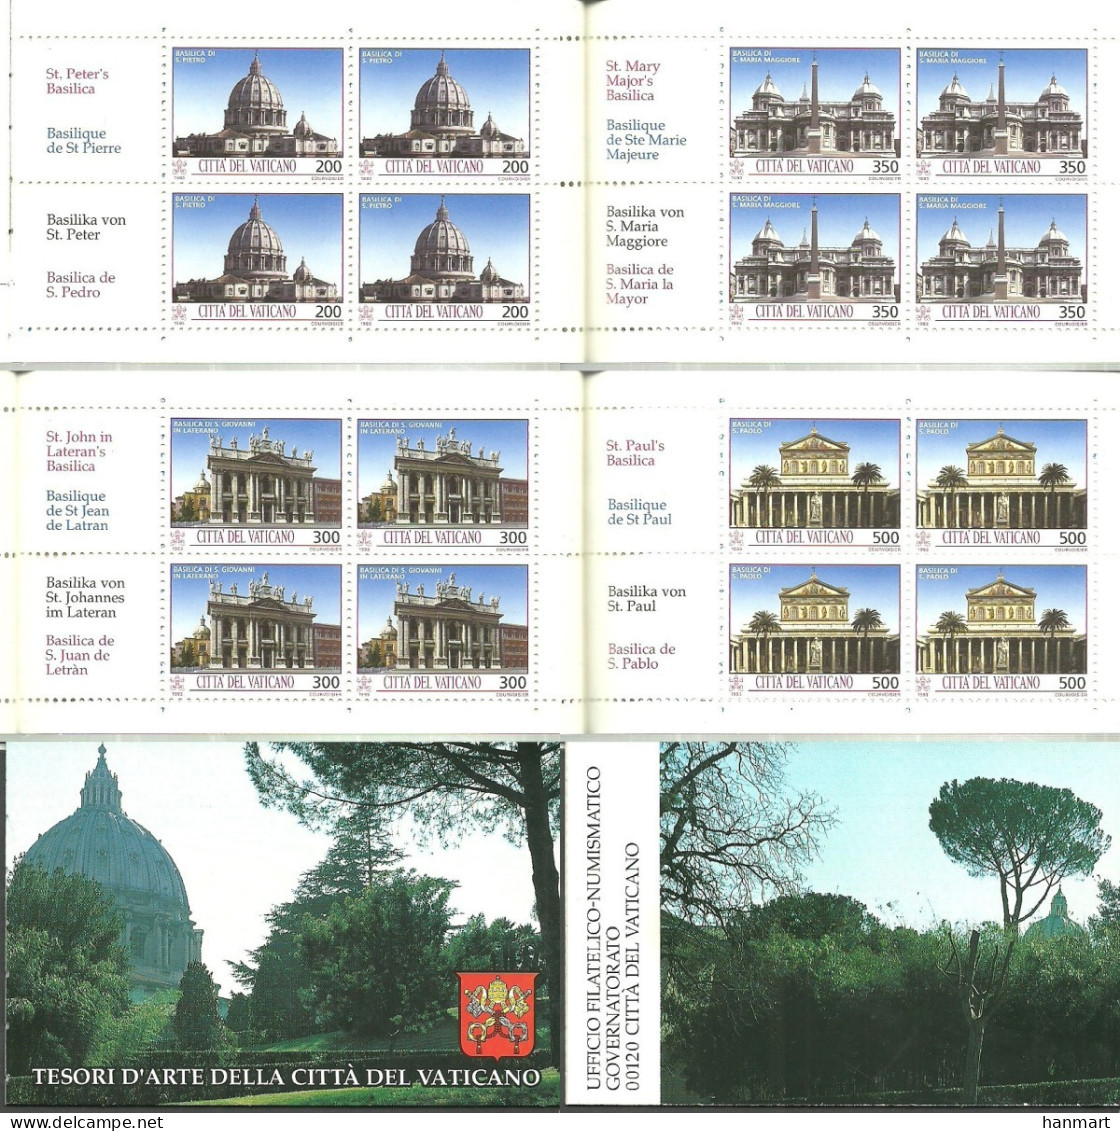 Vatican City 1993 Mi Mh O-4 MNH  (ZE2 VTCmhO-4) - Churches & Cathedrals